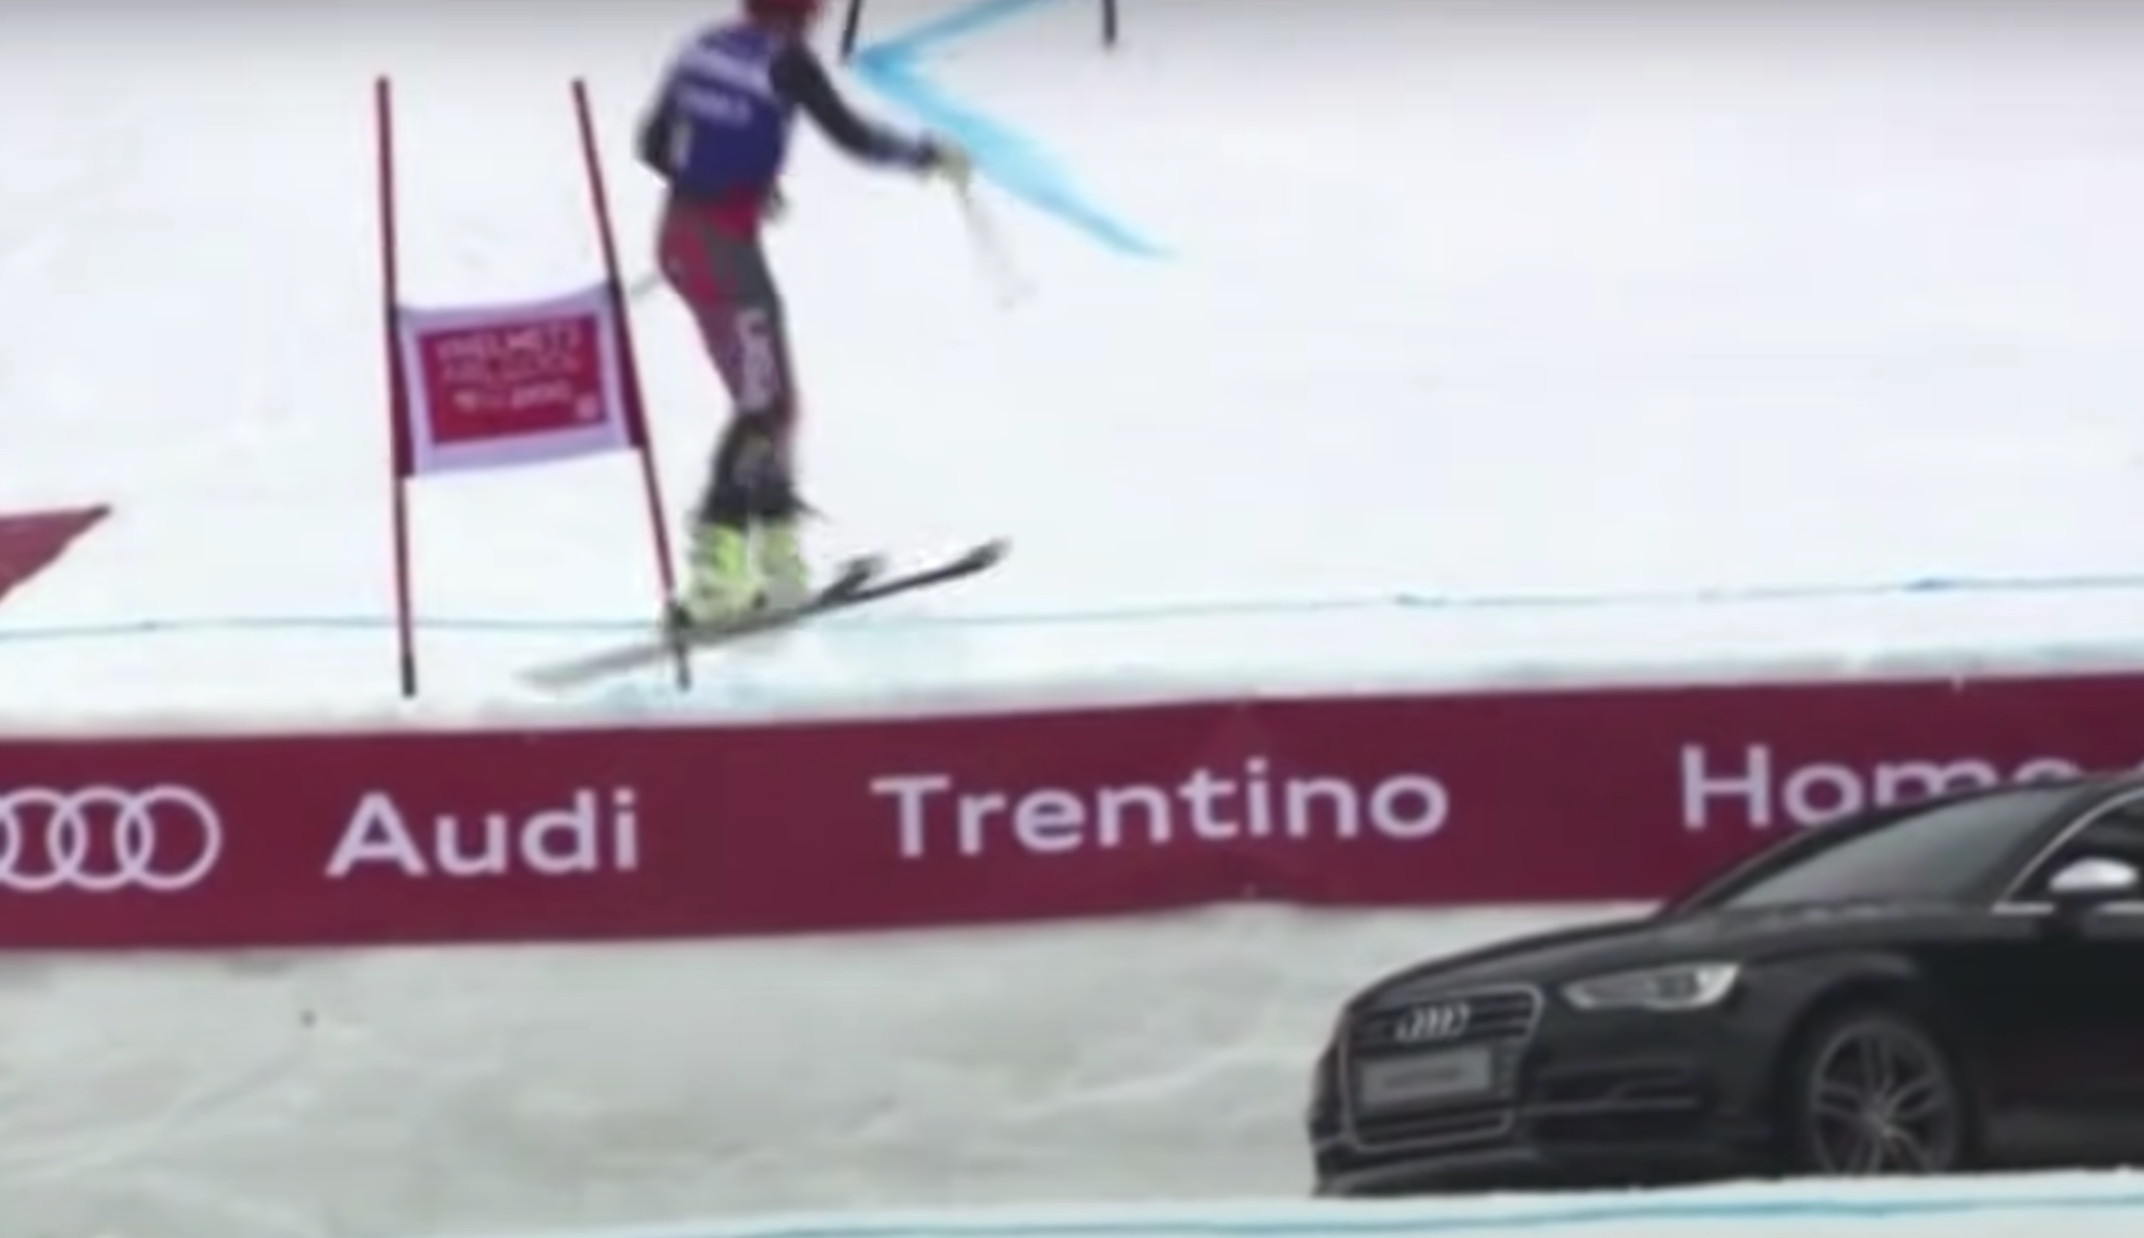 That Time Bode Miller Threw 360° During World Cup Race